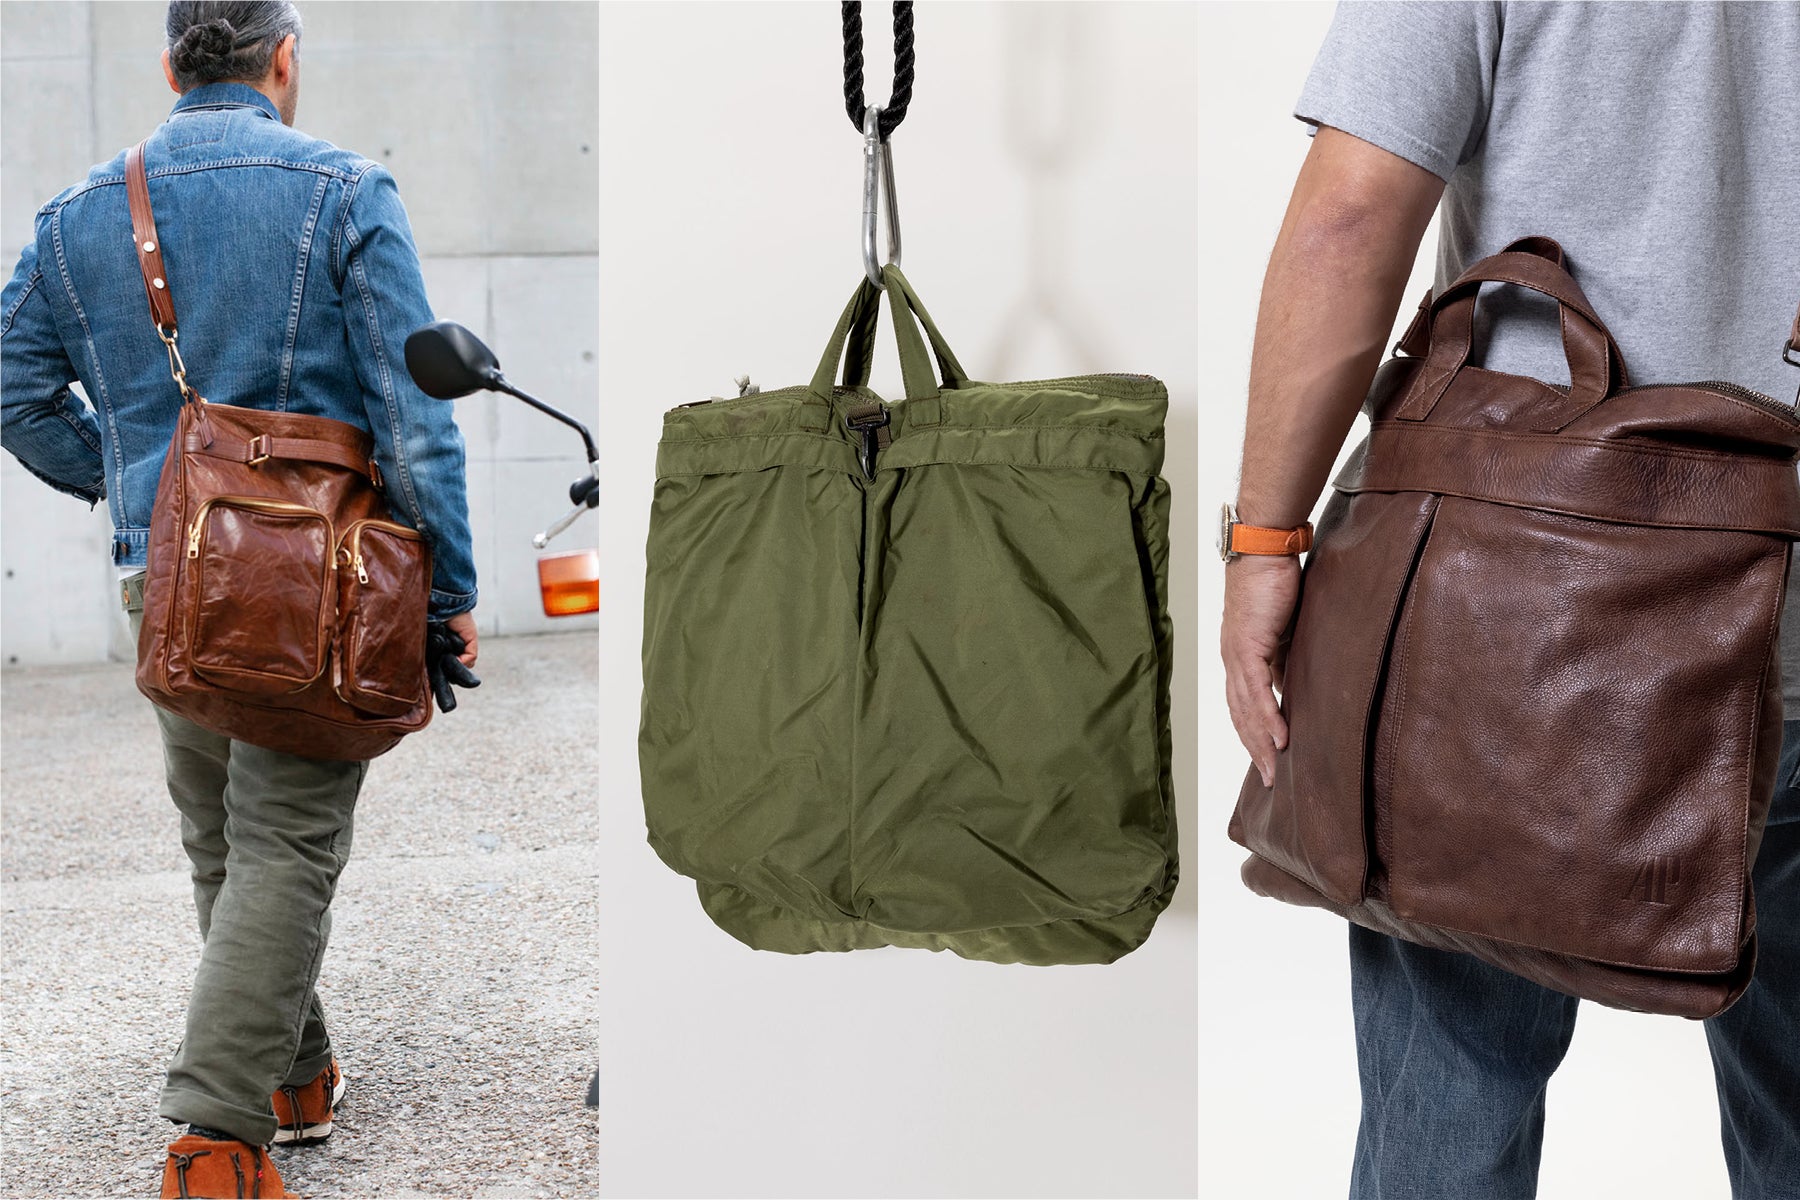 The Helmet Bag - From military use to your workday commuter